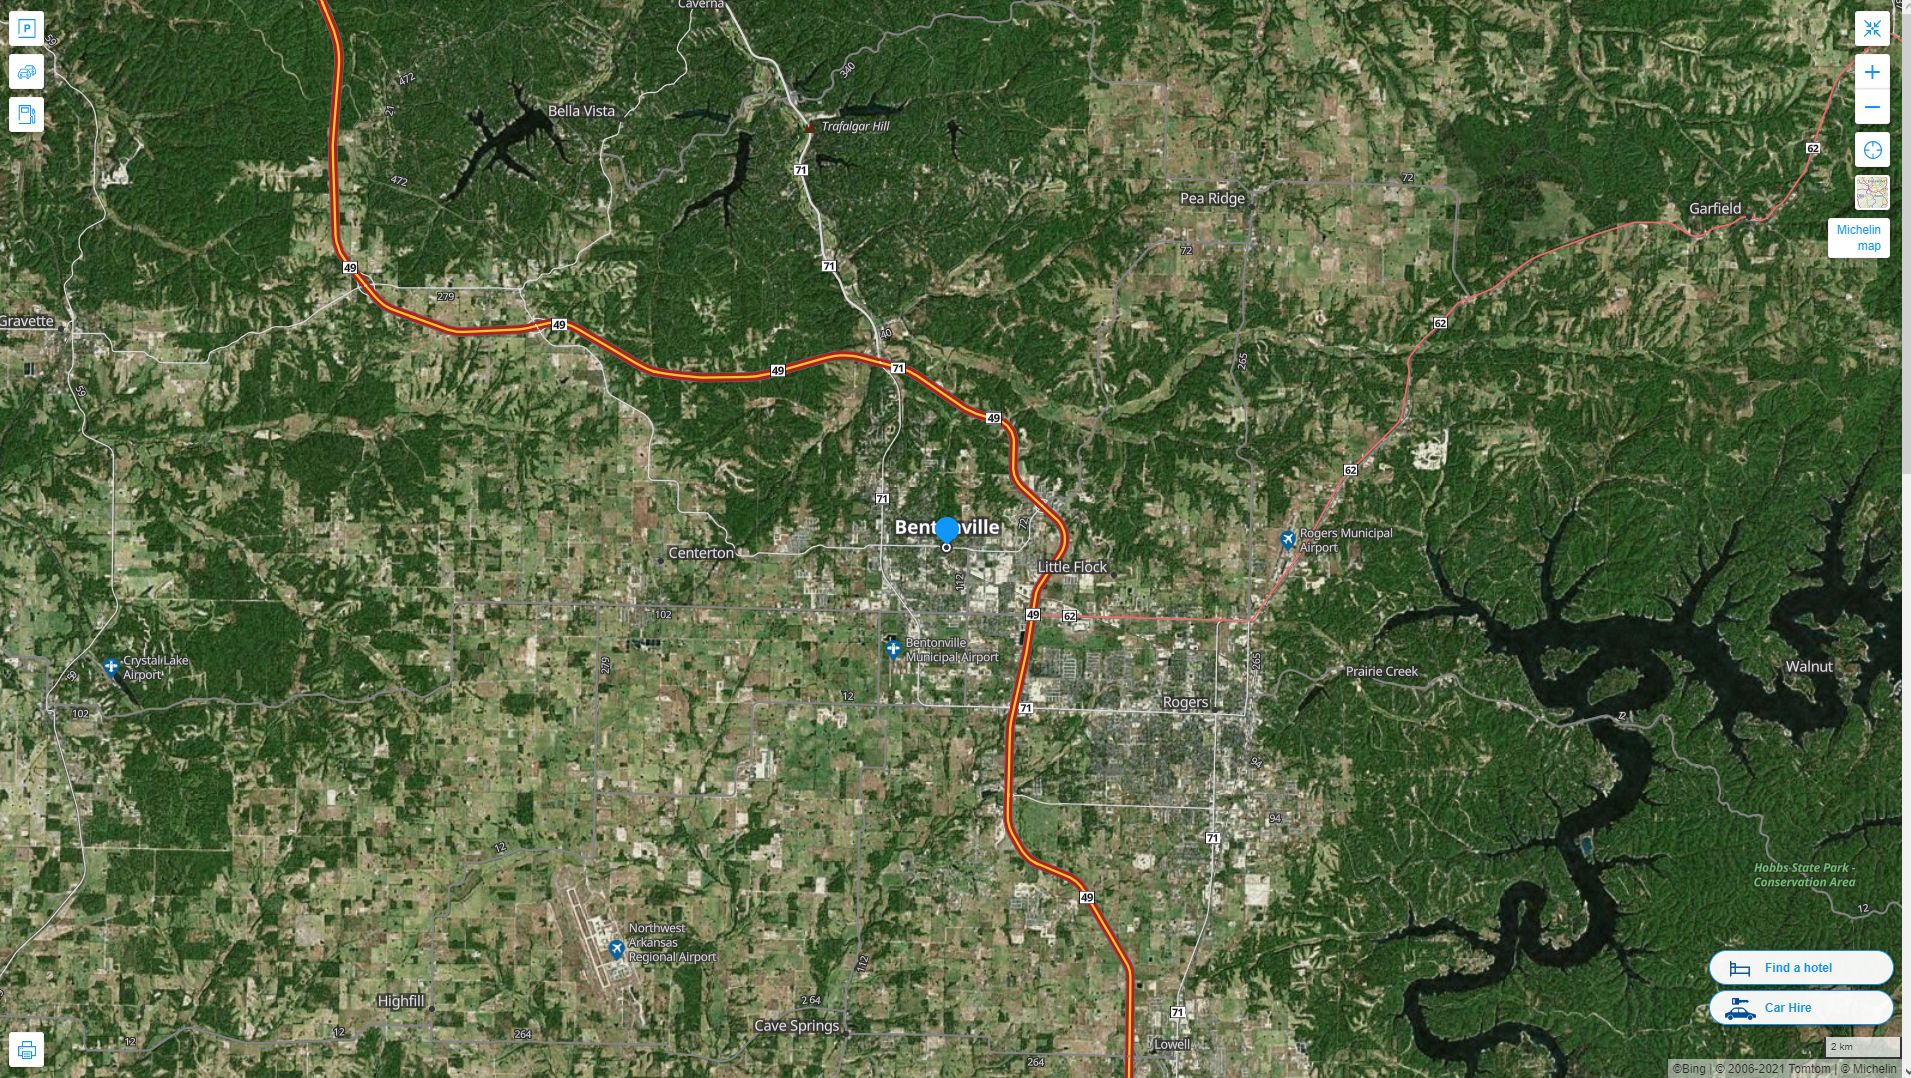 Bentonville Arkansas Highway and Road Map with Satellite View